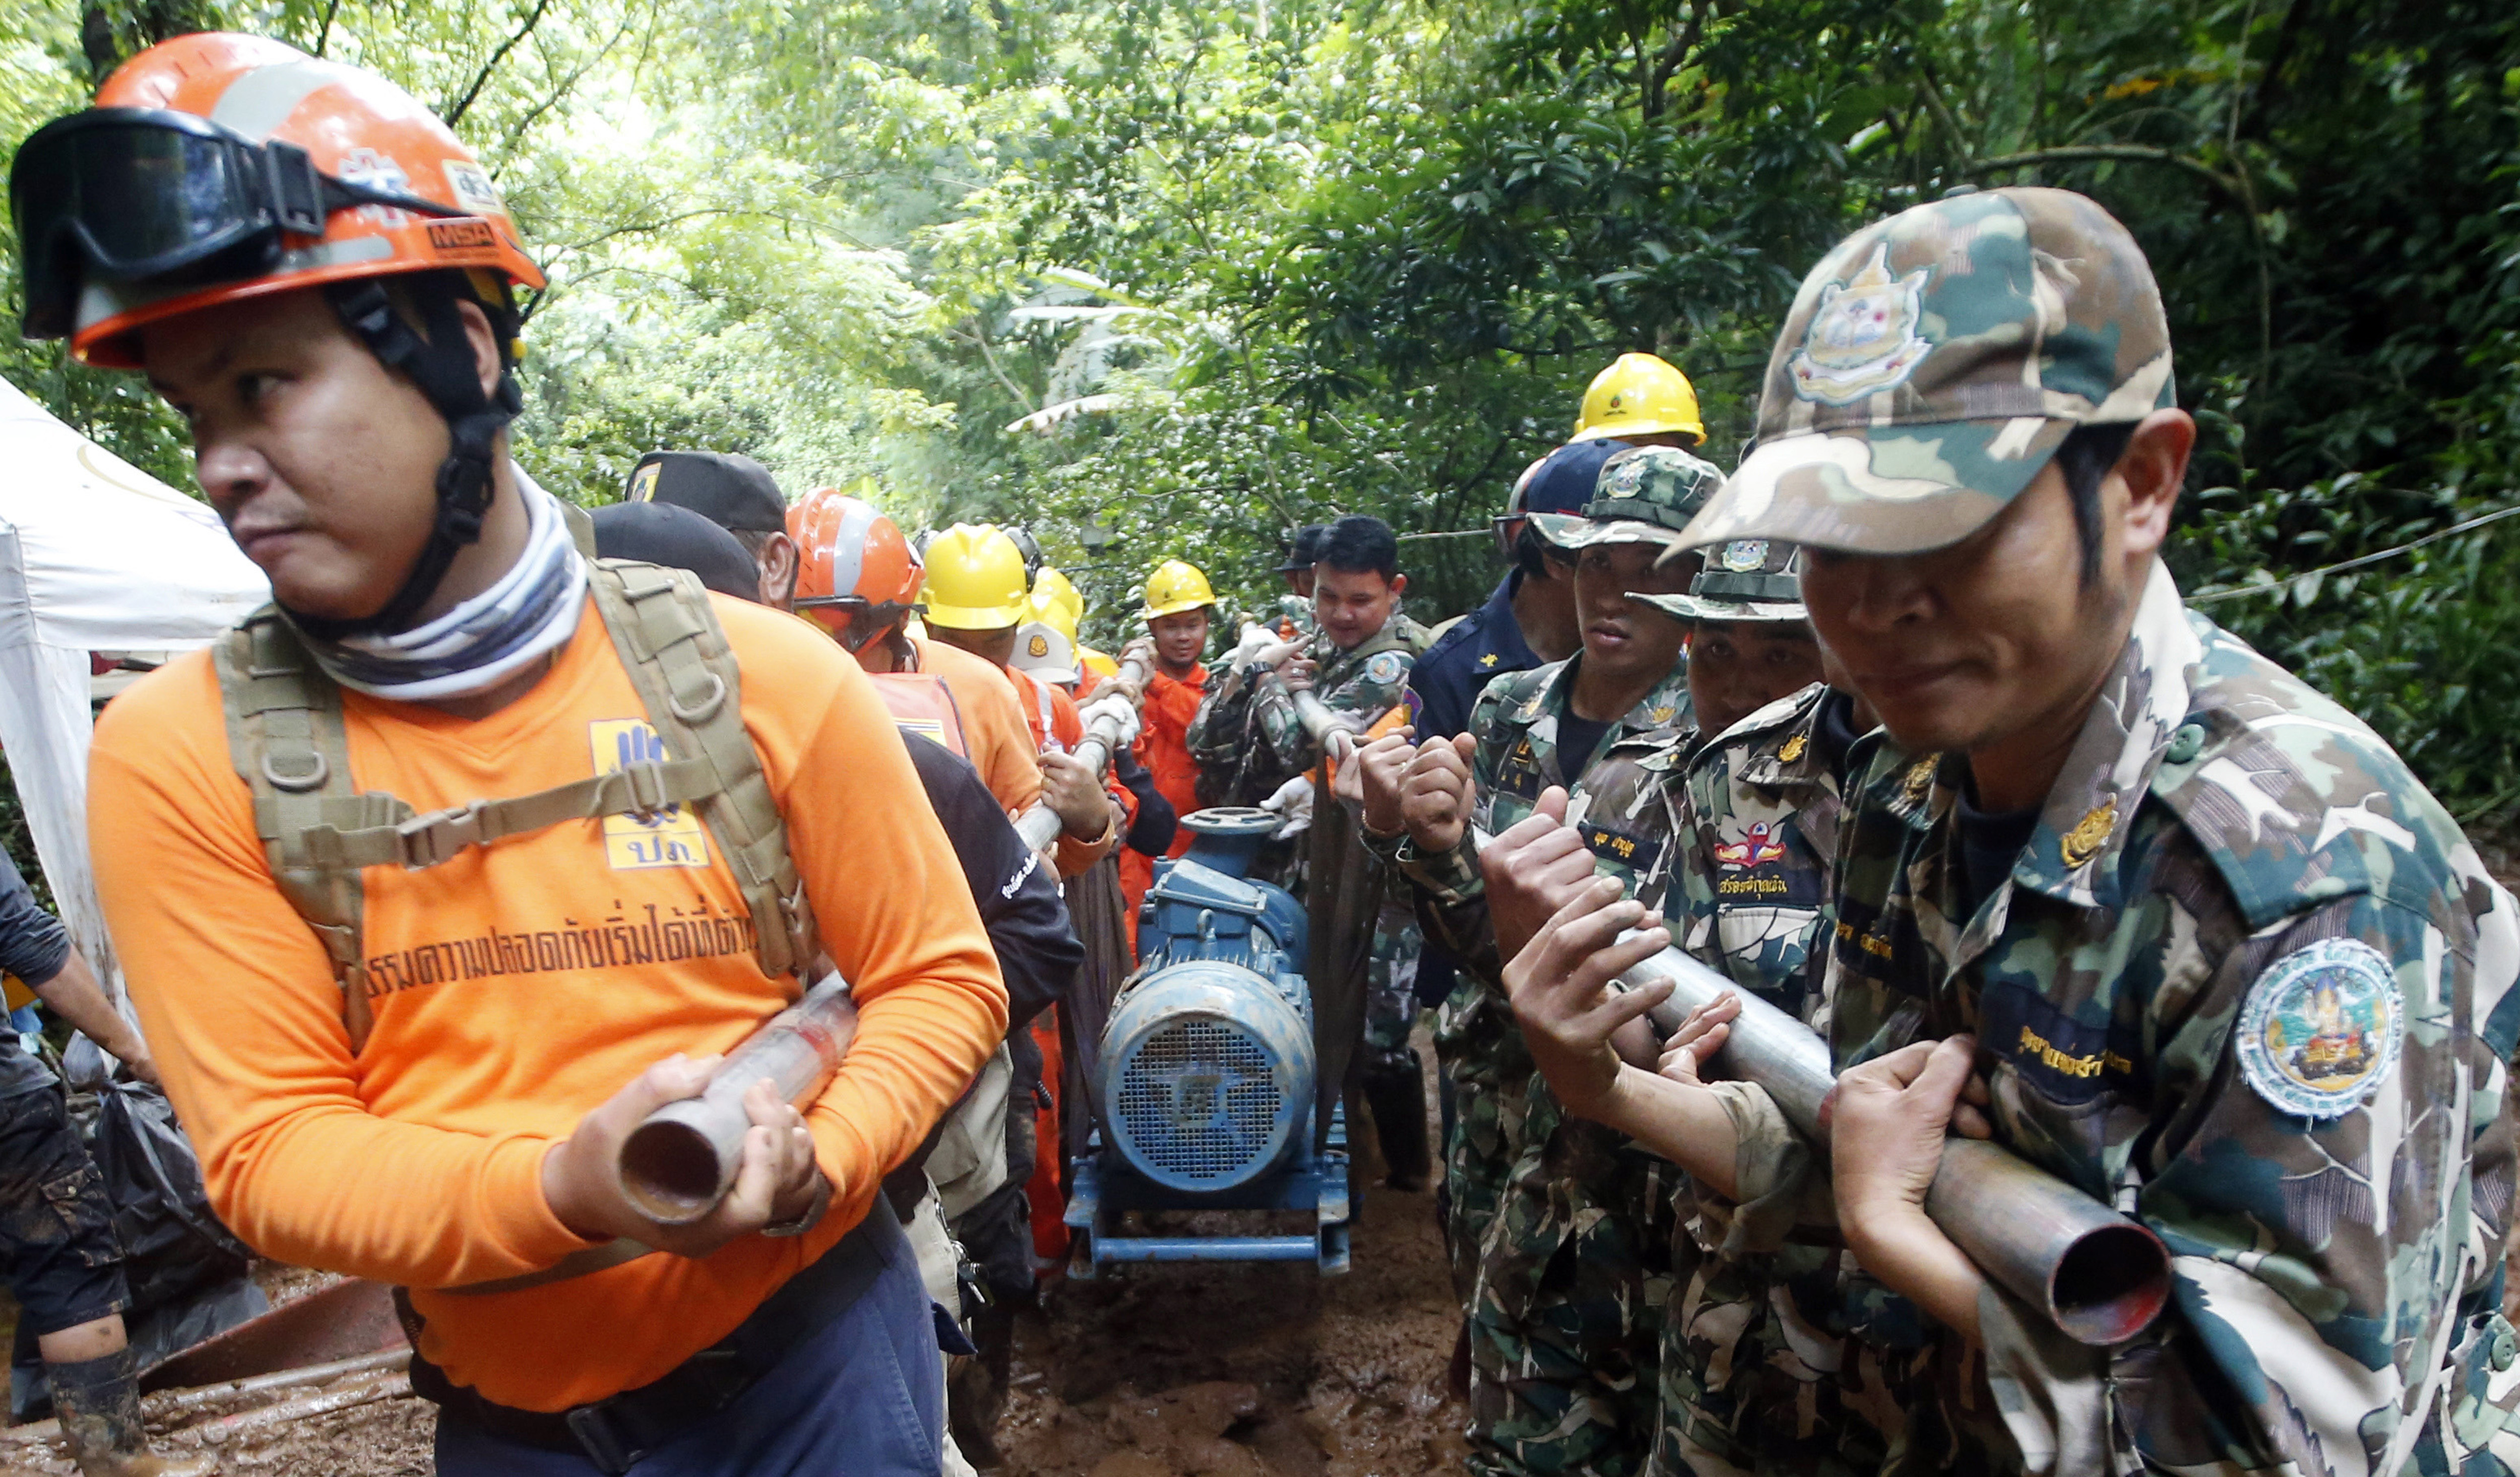 Rescue personnel drag a water pump  up to the flooded cave that a soccer team and their coach are believed to be missing in, Thursday, June 28, 2018, in Mae Sai, Chiang Rai province, in northern Thailand. A U.S. military team and British cave experts have joined the rescue effort in northern Thailand for 12 boys and their soccer coach stranded for a fifth day inside a cave being flooded by near-constant rains. (AP Photo/Sakchai Lalit)